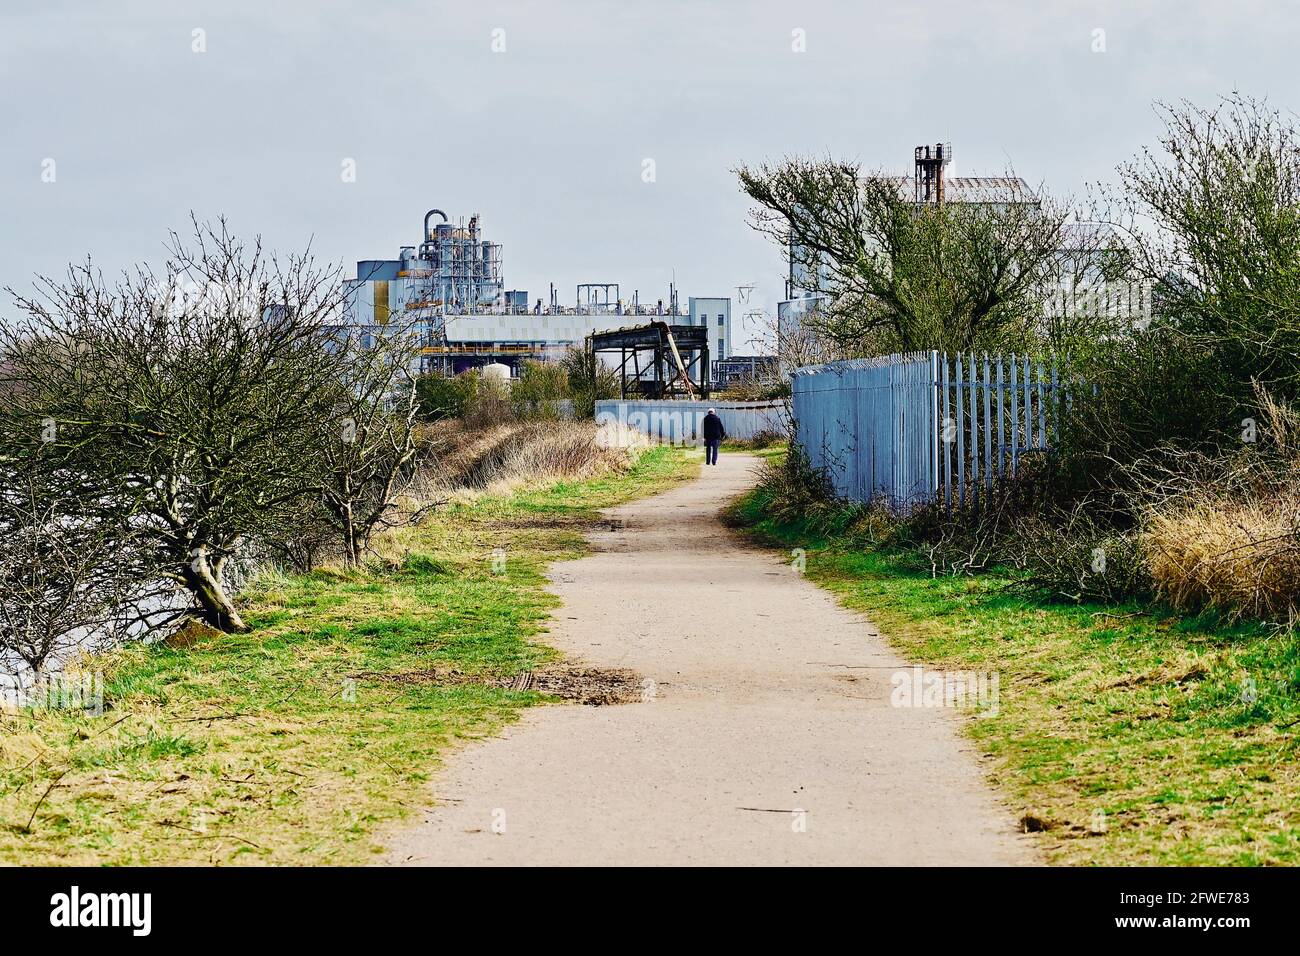 Public footpath running next to industrial plant and former ICI hillhouse site Stock Photo